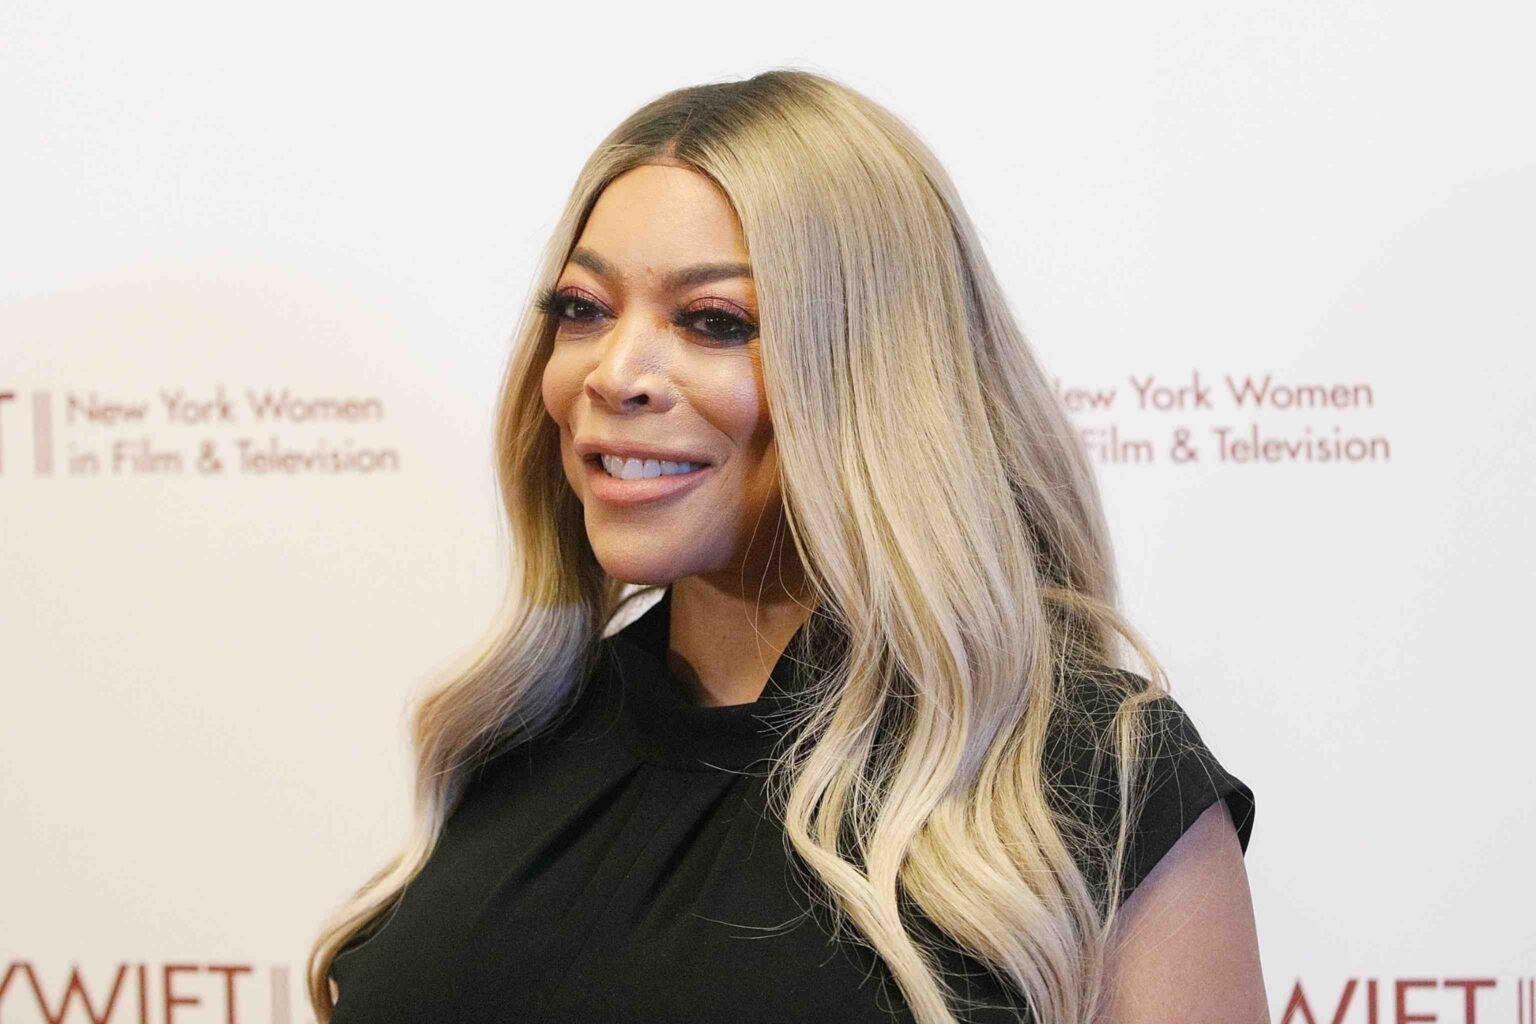 Will Blac Chyna be Wendy Williams's final interview? Explore the buzz, dive into the drama, and decipher the saga as we follow our beloved TV queen's twilight tale.